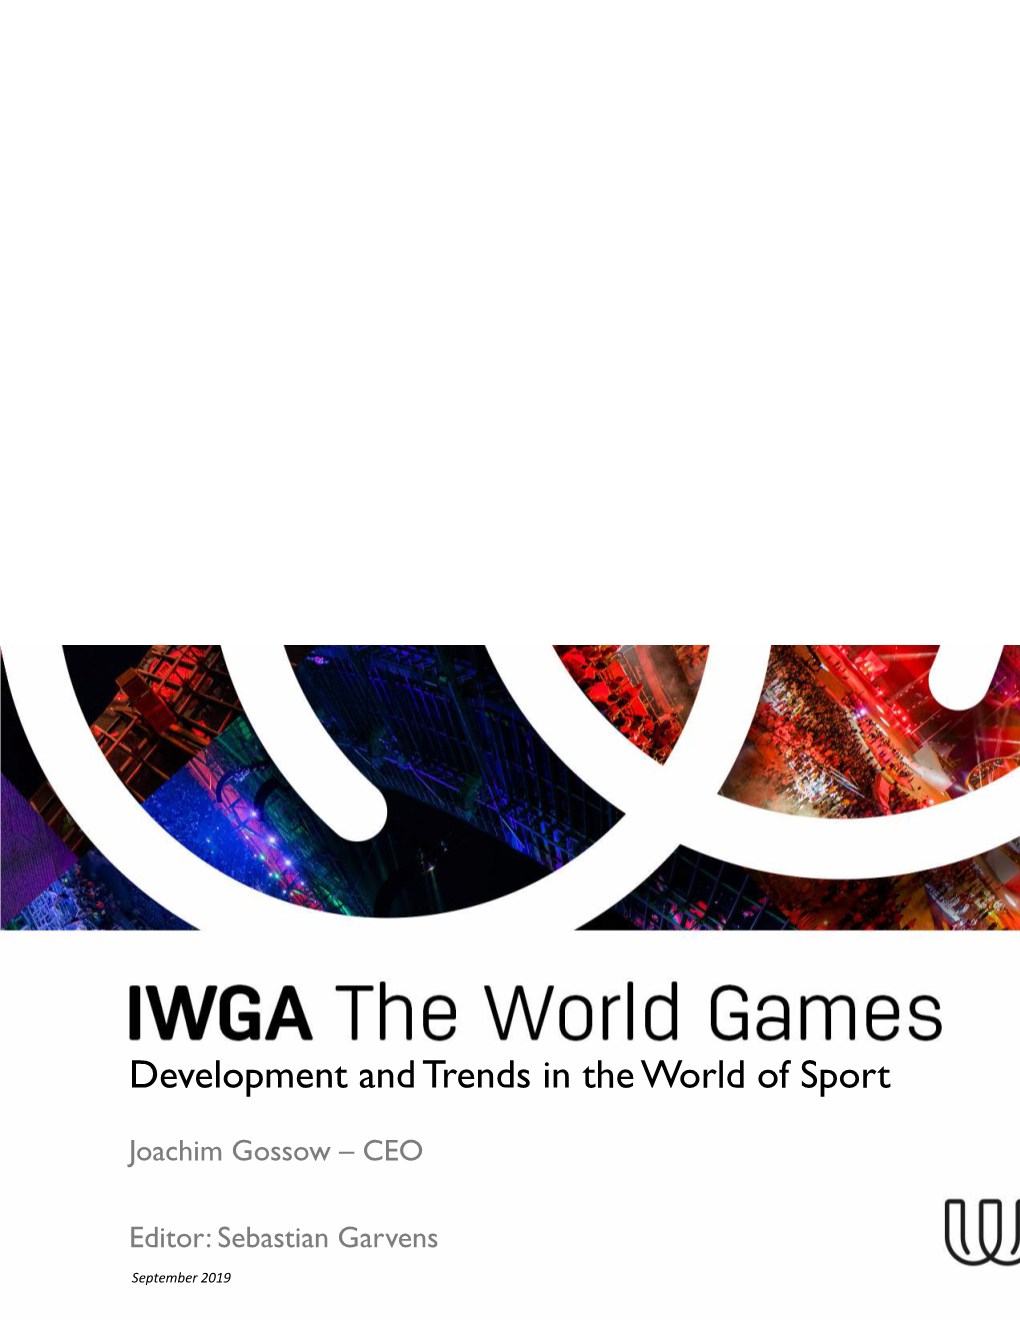 Development and Trends in the World of Sport